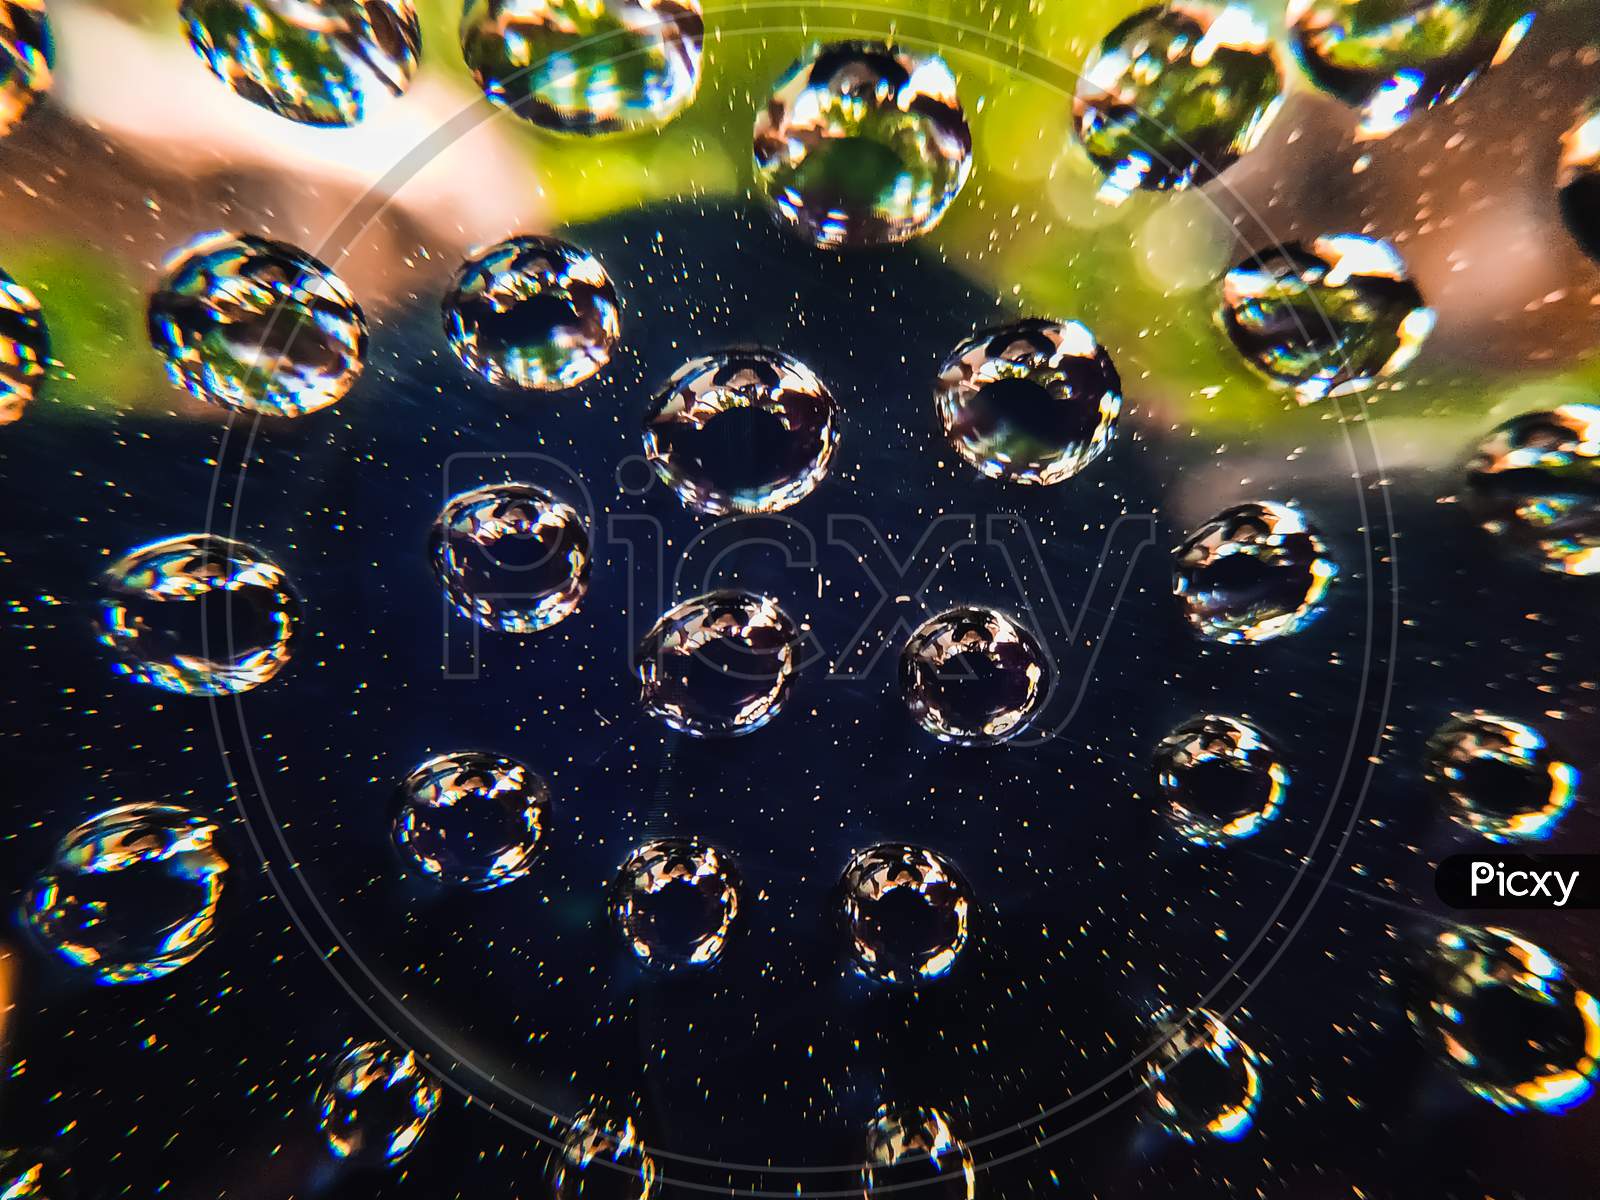 Water drops on a glass